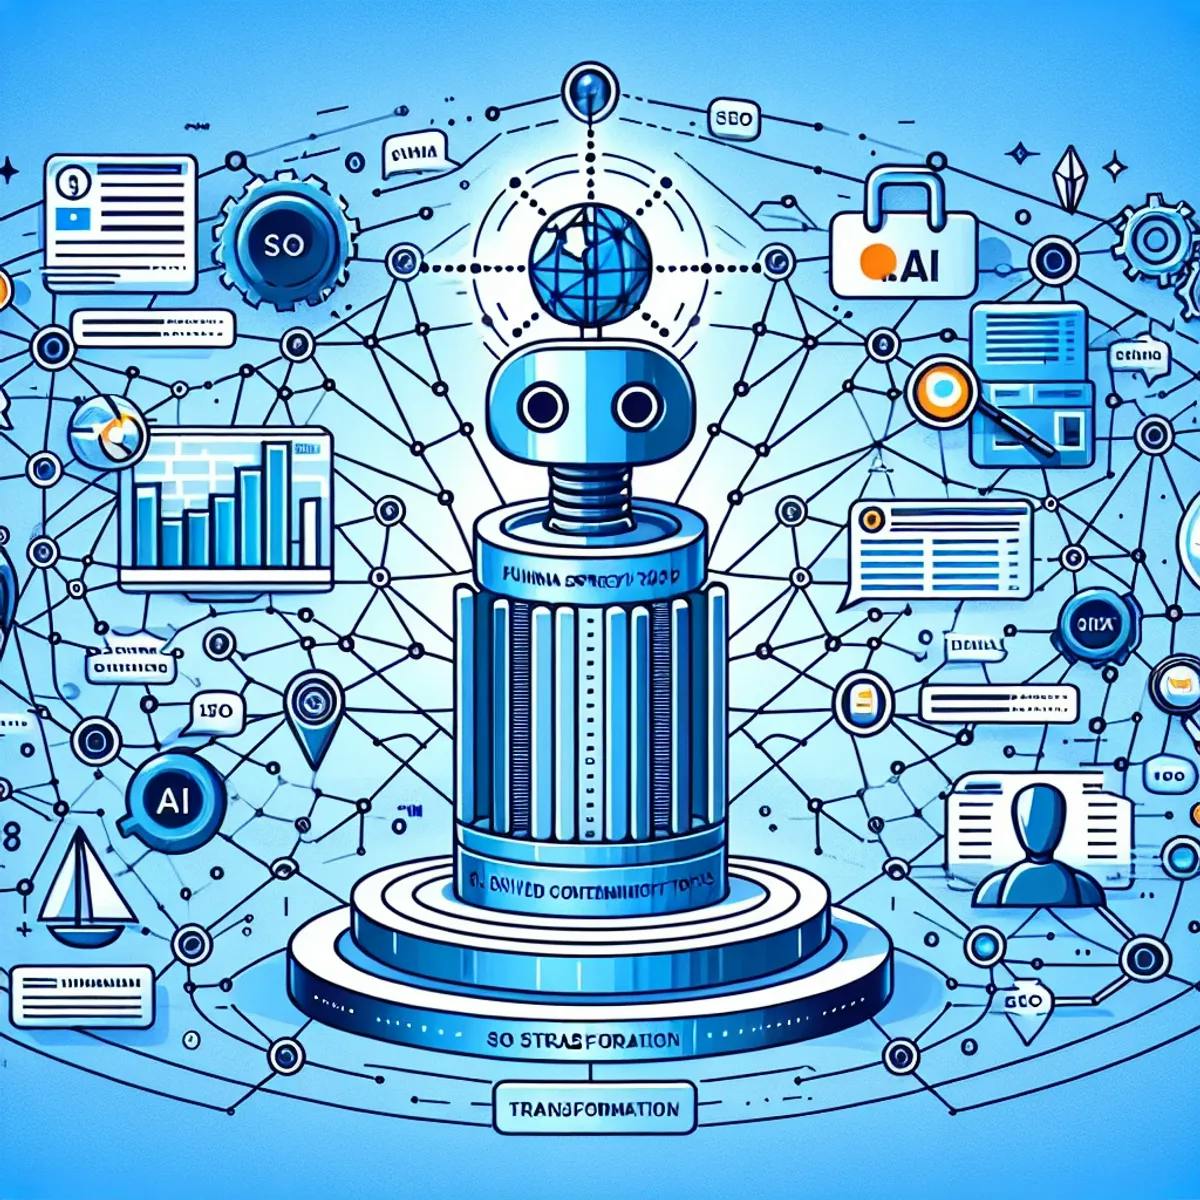 AI-driven SEO strategy transformation: A large pillar surrounded by interconnected webs symbolizing diverse user queries and engagement, with symbolic tools like a robotic hand and surfboard representing AI tools used in SEO.